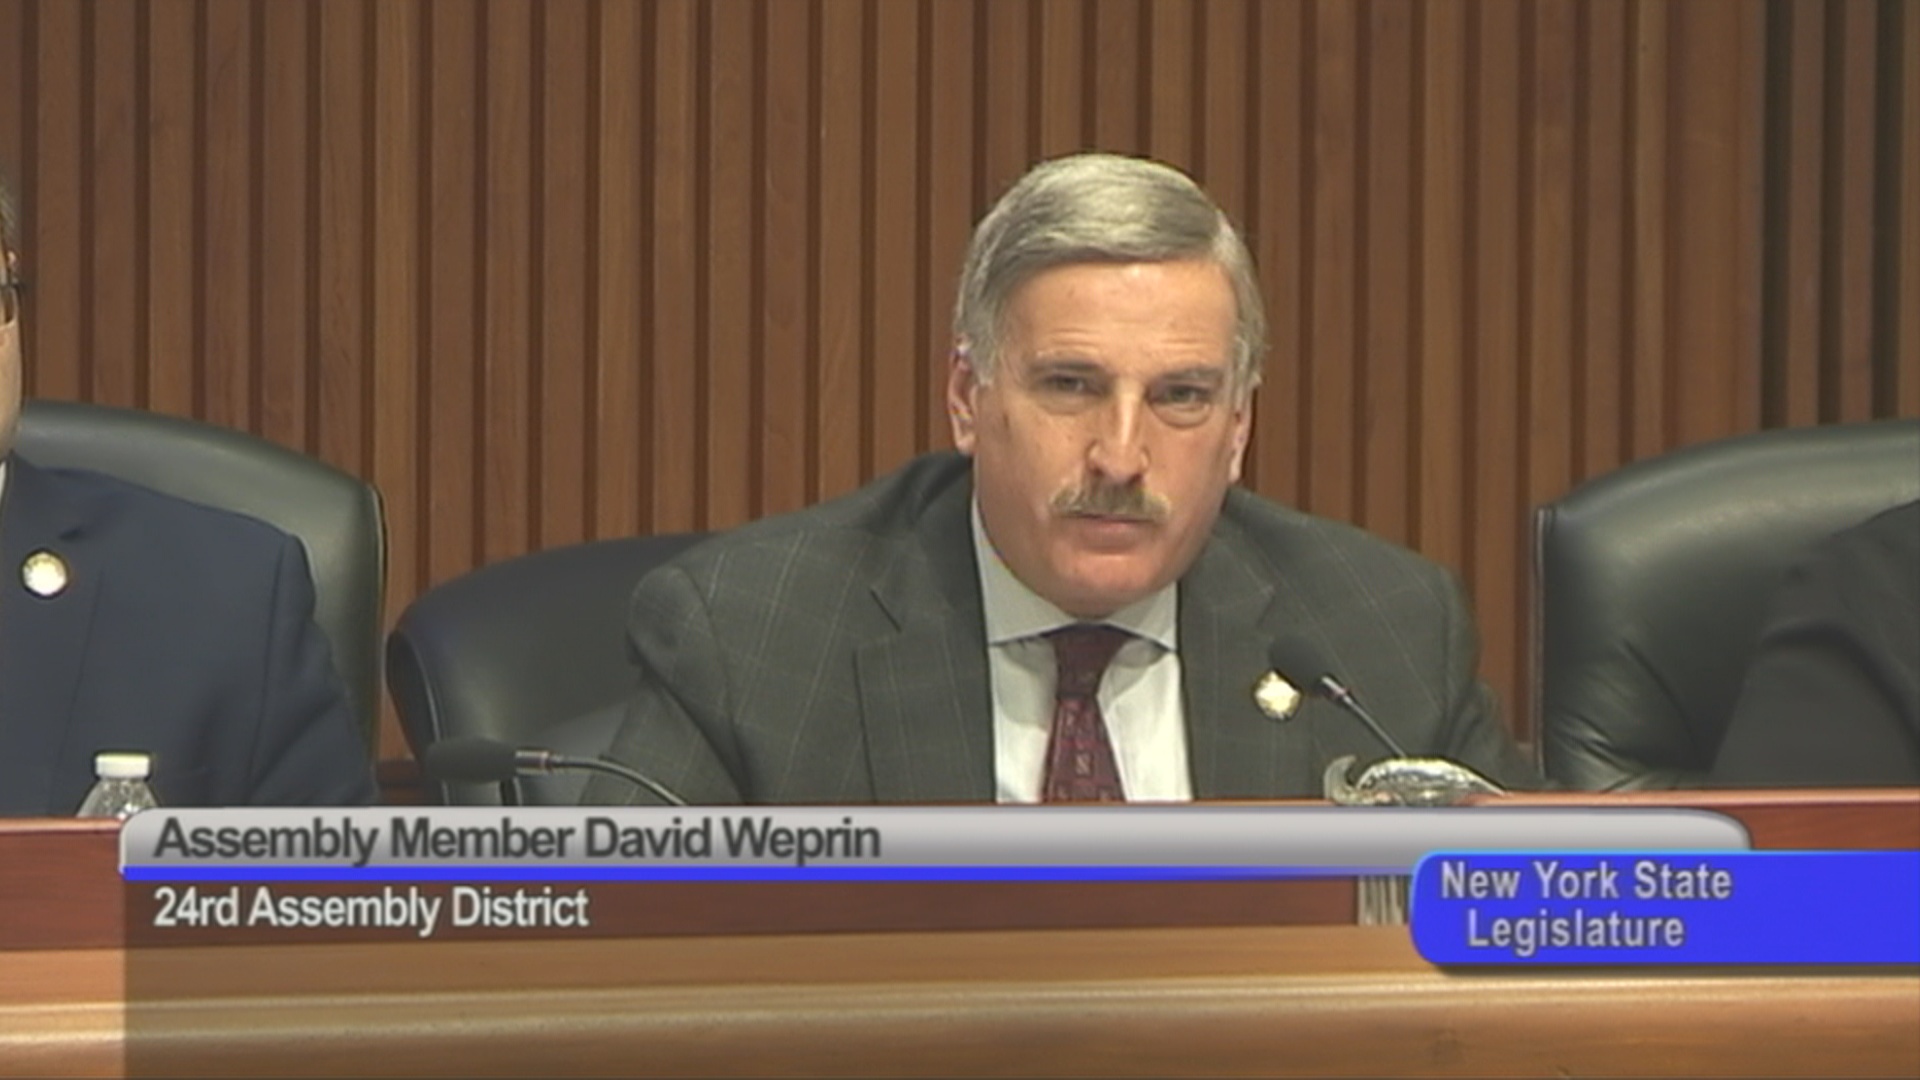 Weprin's concern with NYC Public Schools not following ADA standards